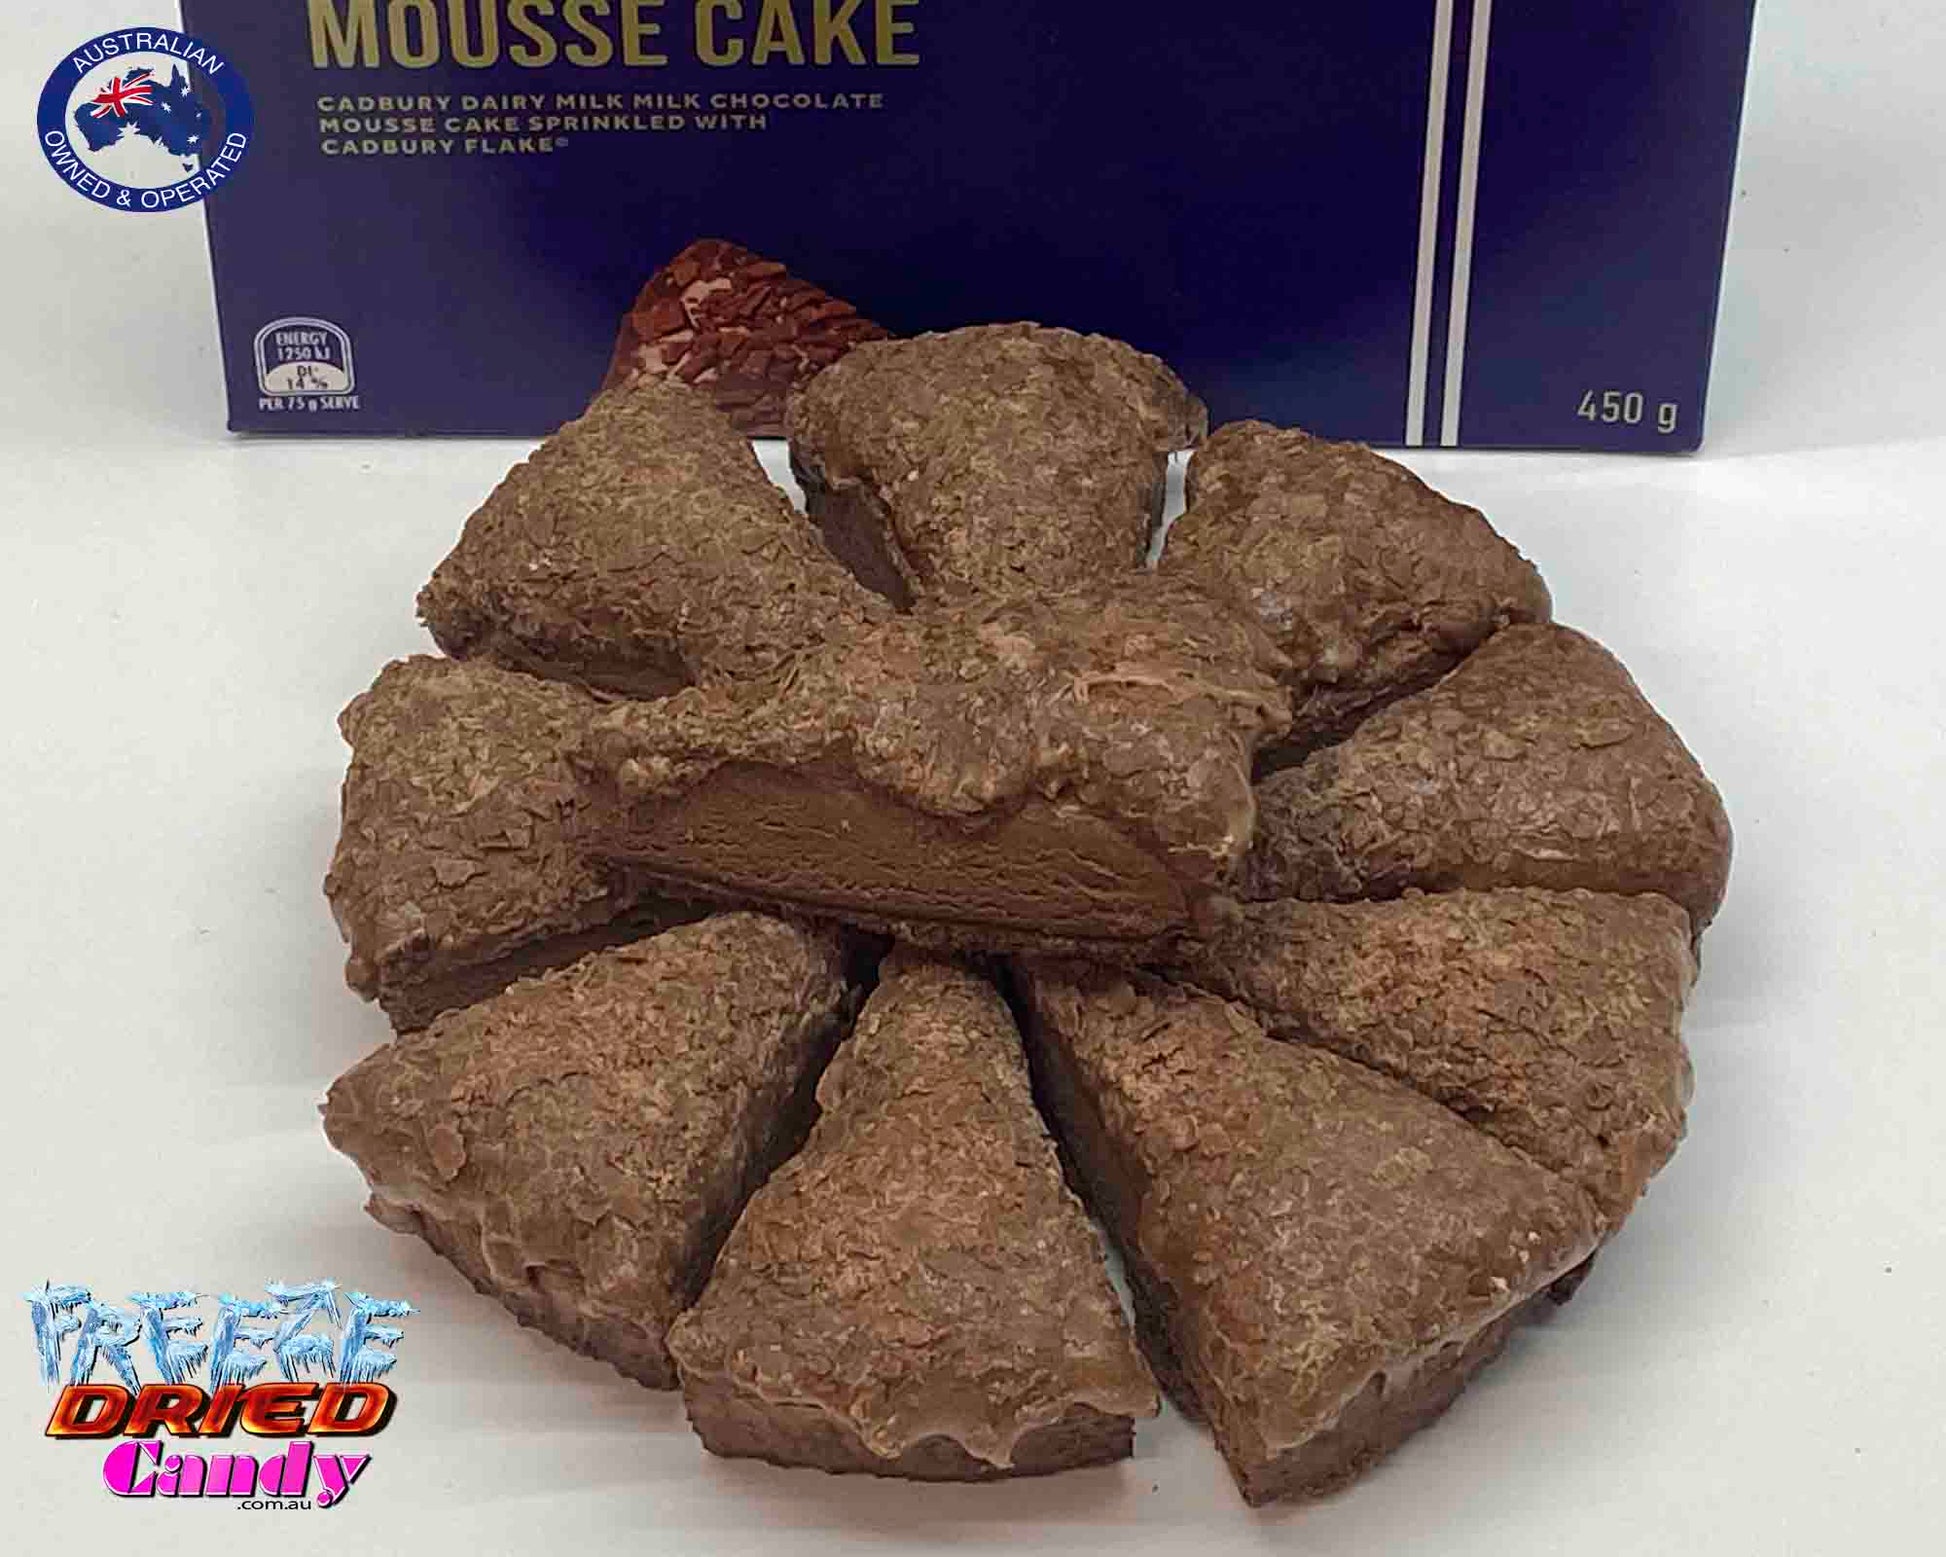 Freeze Dried Dairy Milk Mousse Cake - Cadbury- Freeze Dried Candy Lollies | Australia. Once Freeze Dried and all the moisture has been removed, Dairy Milk Mousse cake turns into a super crunchy decadent treat.  To die for..!!   Proving you can never have too much Dairy Milk, this delicious creation features a Dairy Milk mousse layer, topped with Dairy Milk sauce, sprinkled Dairy Milk pieces and, of course, you've got a scrumptious biscuit base as the foundation.